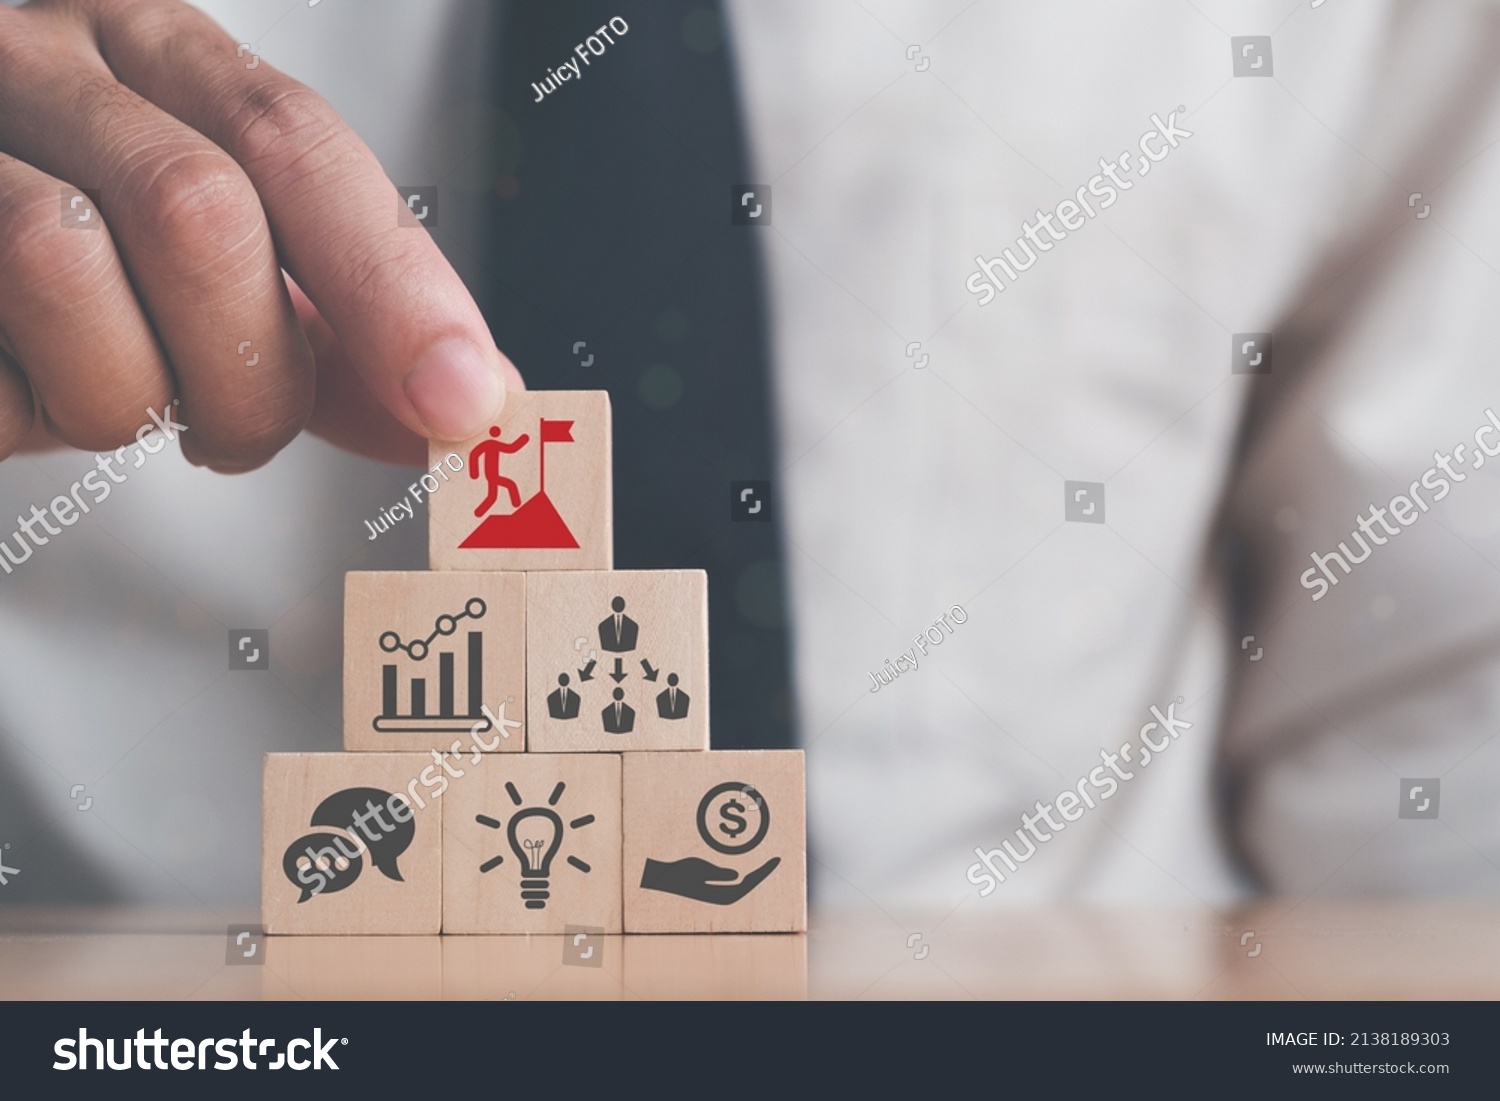 Business man puts the wooden cube with success icon standing with the success factors; experience, personal, network, relationship, vision. Leader and C-suite reaching concept. #2138189303